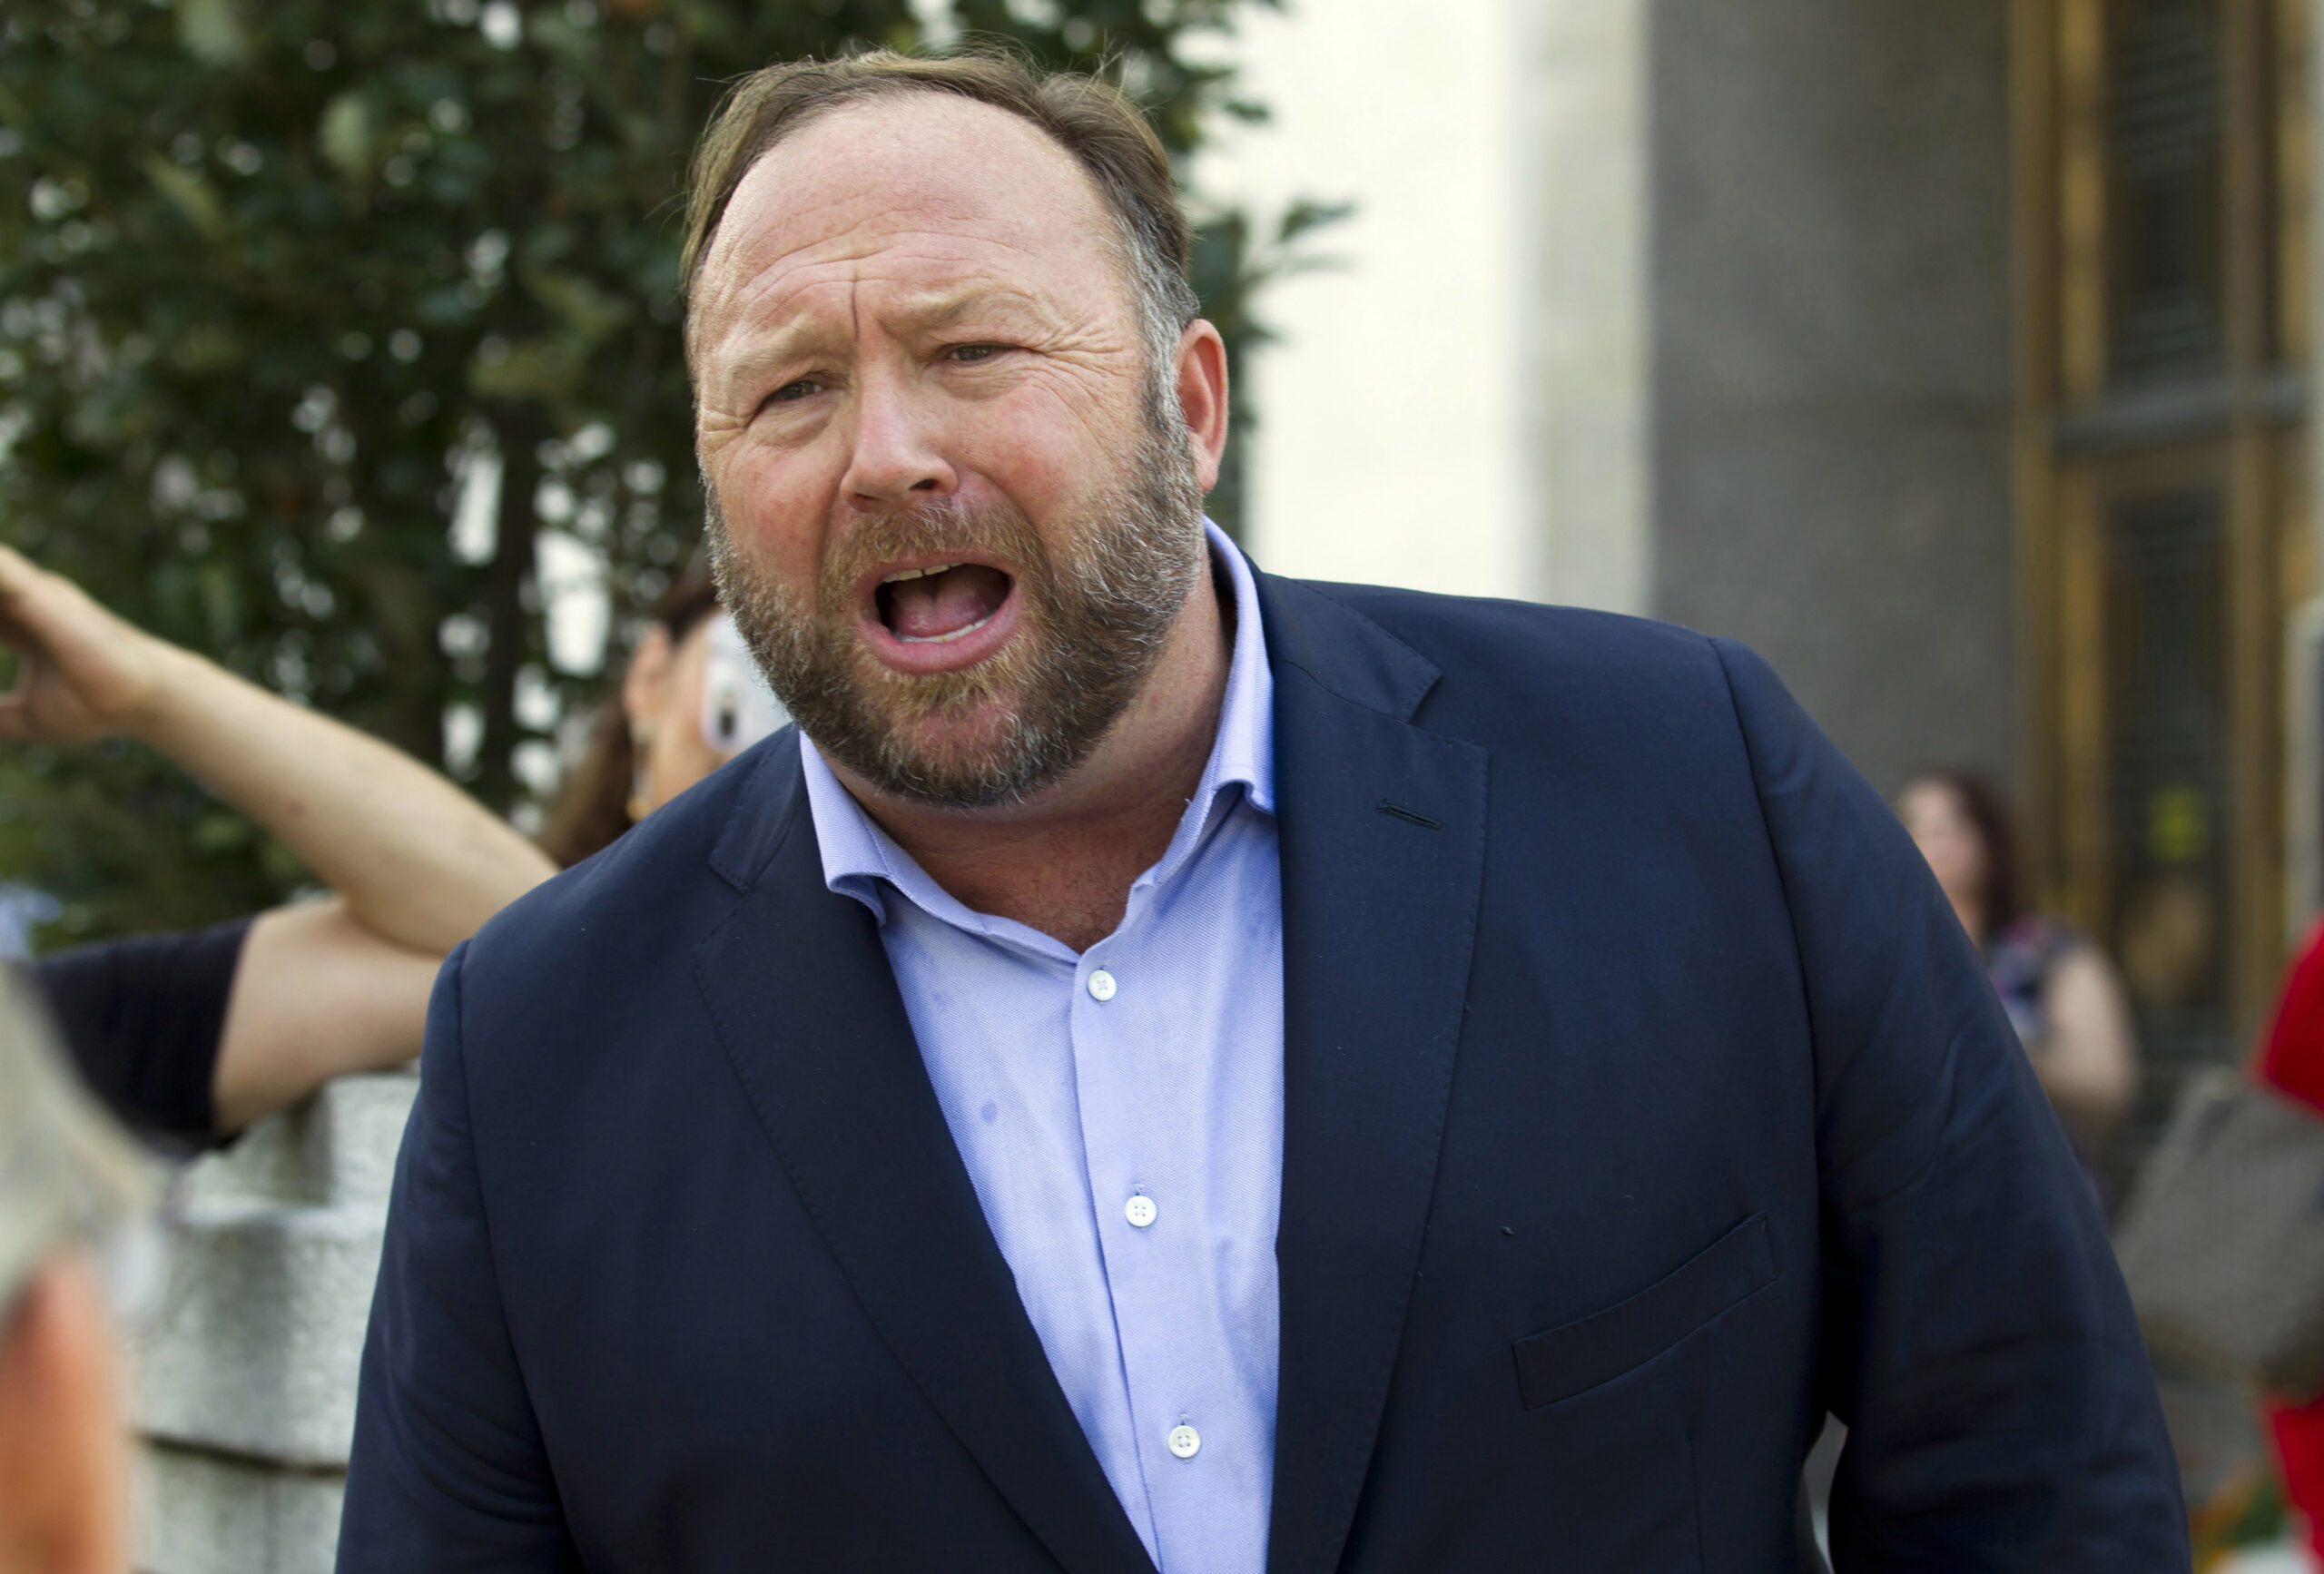 FILE- In this Sept. 5, 2018, file photo Alex Jones speaks outside of the Dirksen building of Capitol Hill in Washington. The U.S. Supreme Court on Monday, April 5, 2021, declined to hear an appeal by the Infowars host and conspiracy theorist, who was fighting a Connecticut court sanction in a defamation lawsuit brought by relatives of some of the victims of the Sandy Hook Elementary School shooting. (AP Photo/Jose Luis Magana, File)